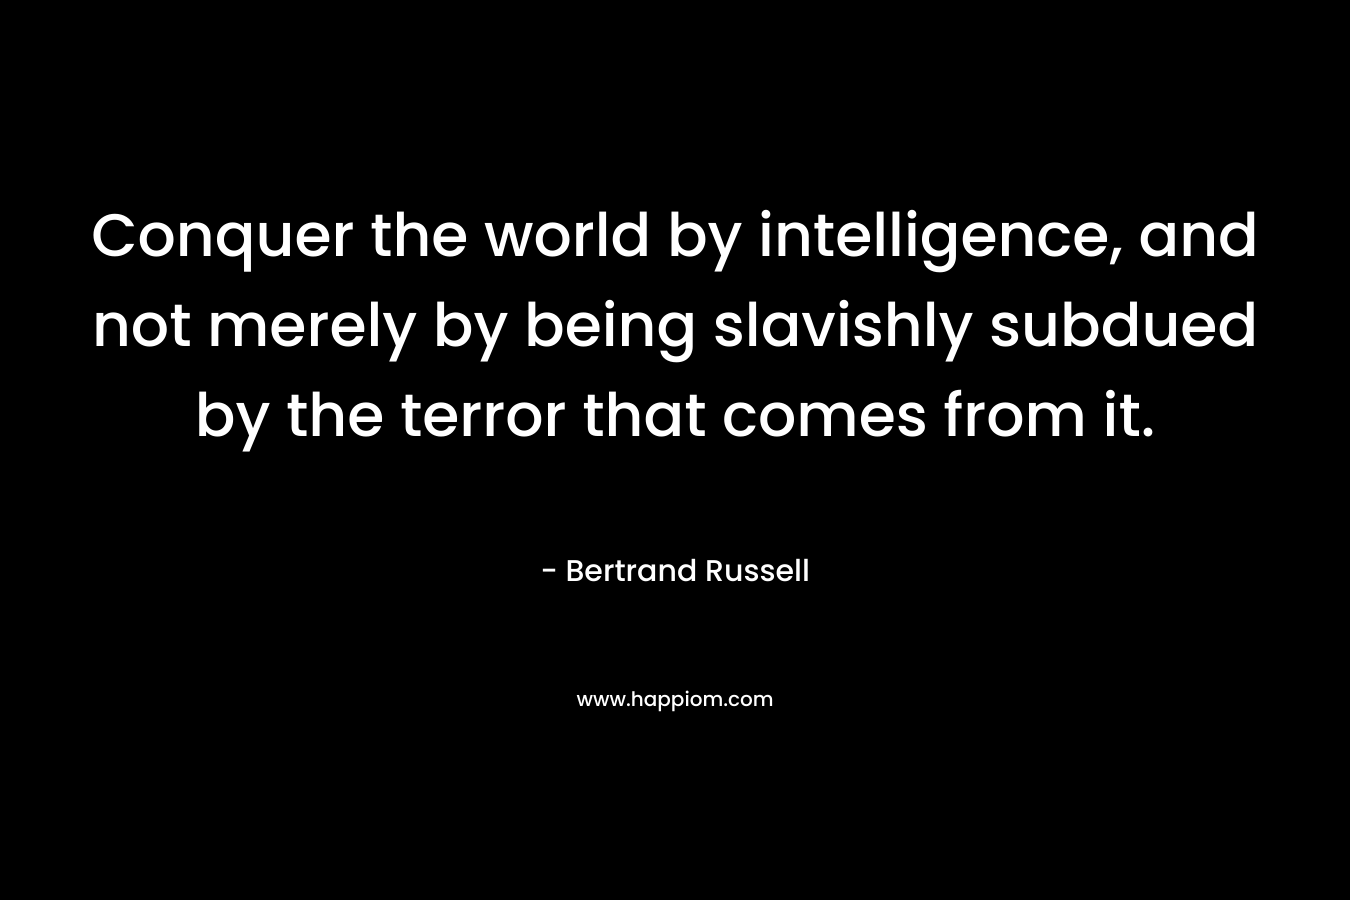 Conquer the world by intelligence, and not merely by being slavishly subdued by the terror that comes from it. – Bertrand Russell